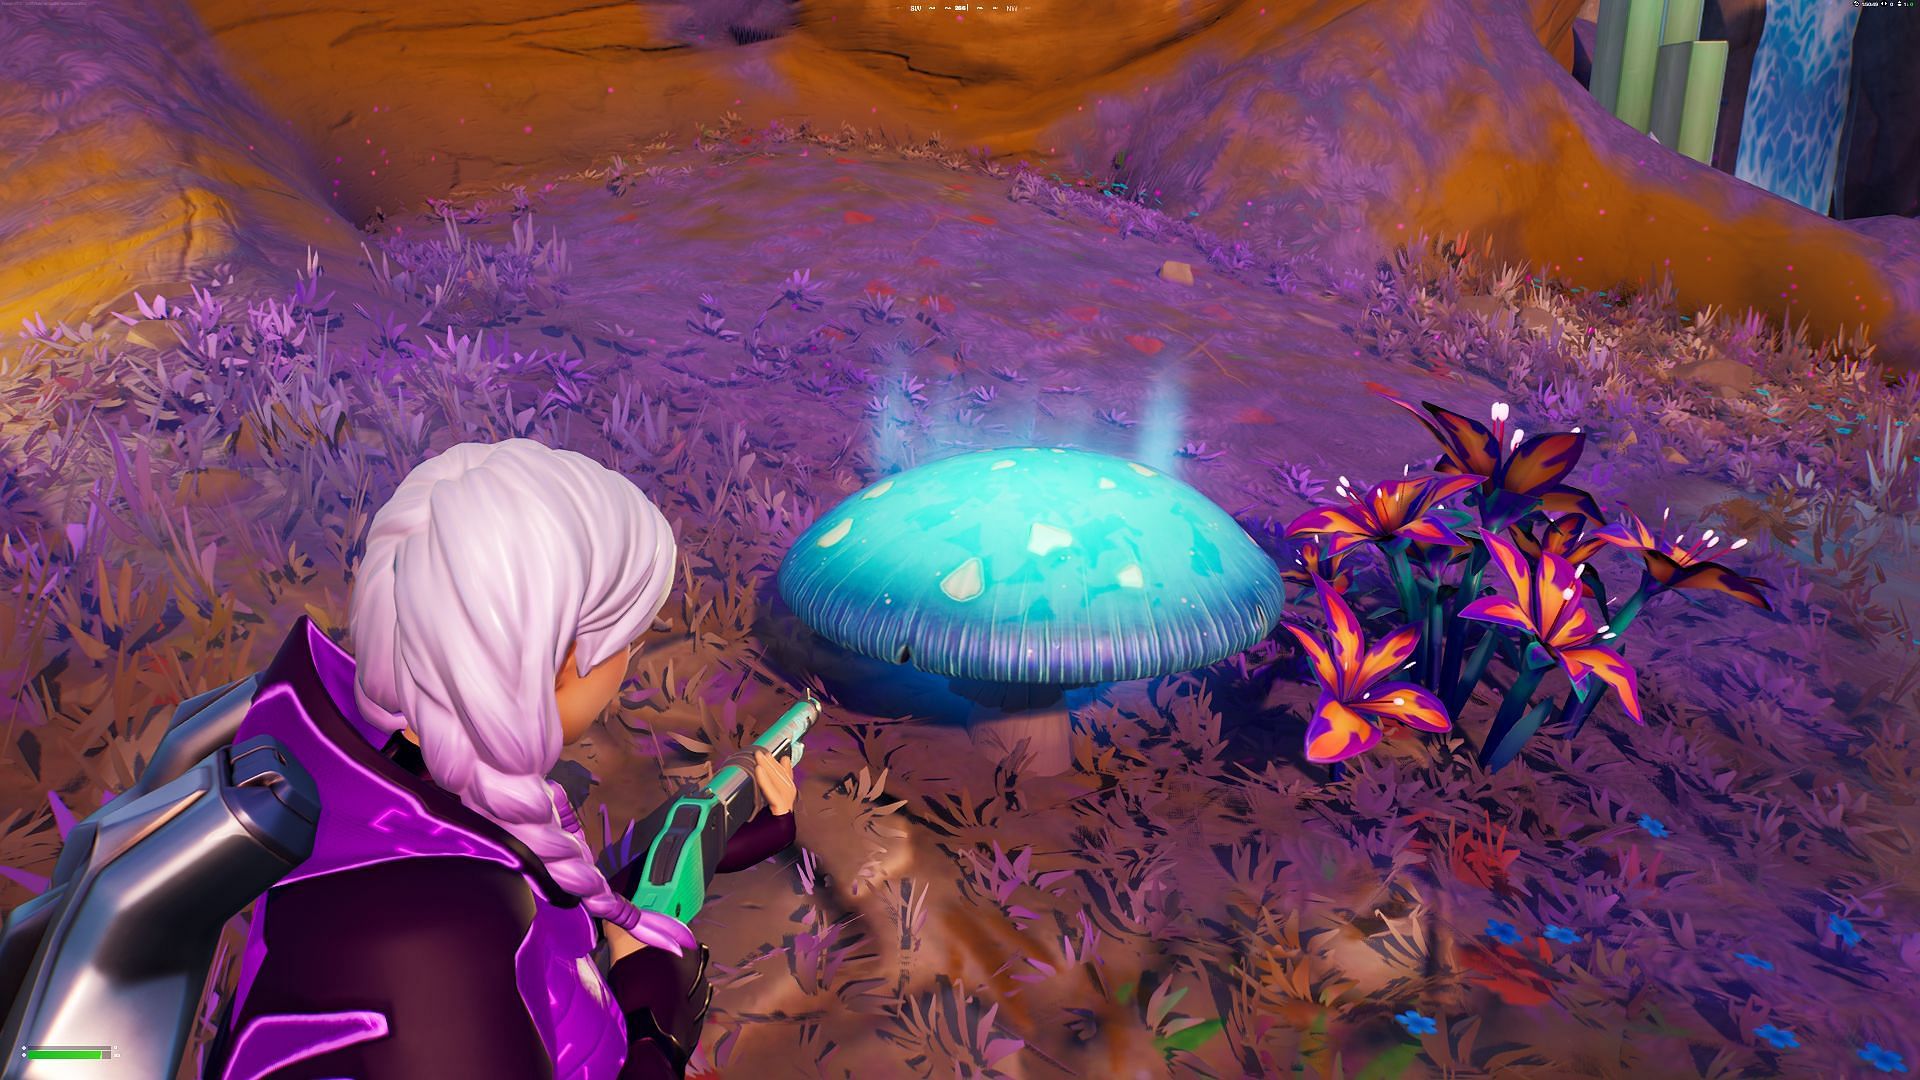 Step onto Bouncy Mushrooms to gain shields at the Reality Tree (Image via Epic Games/Fortnite)